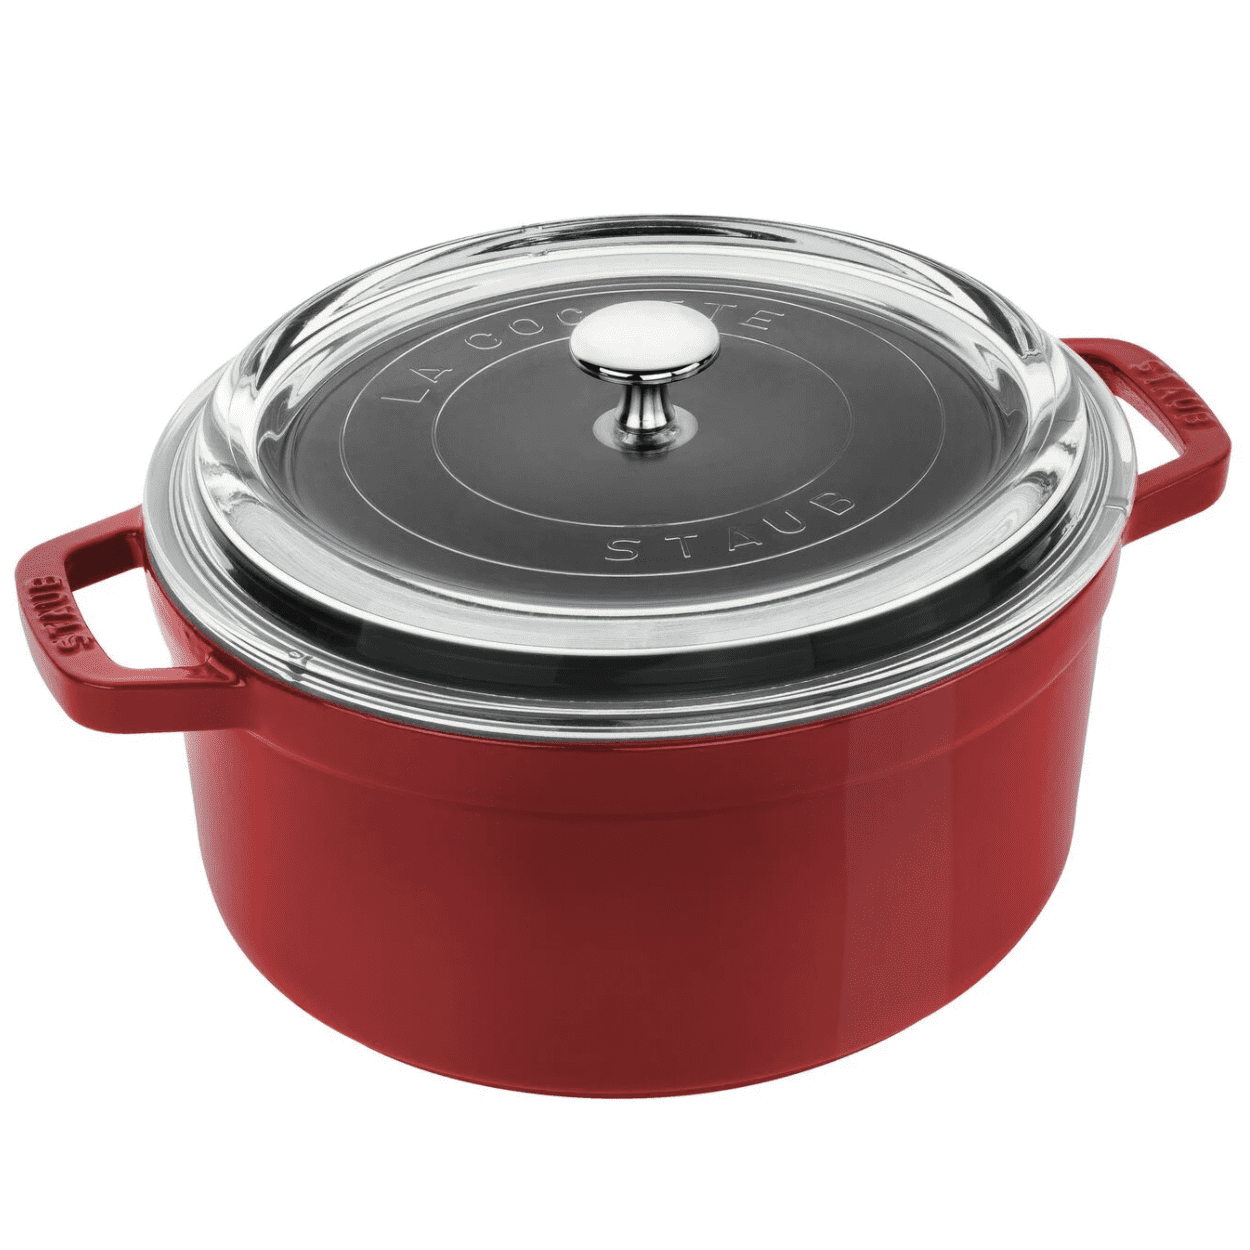 Staub Enameled Cast Iron Cocotte with Glass Lid, 8 Colors on Food52